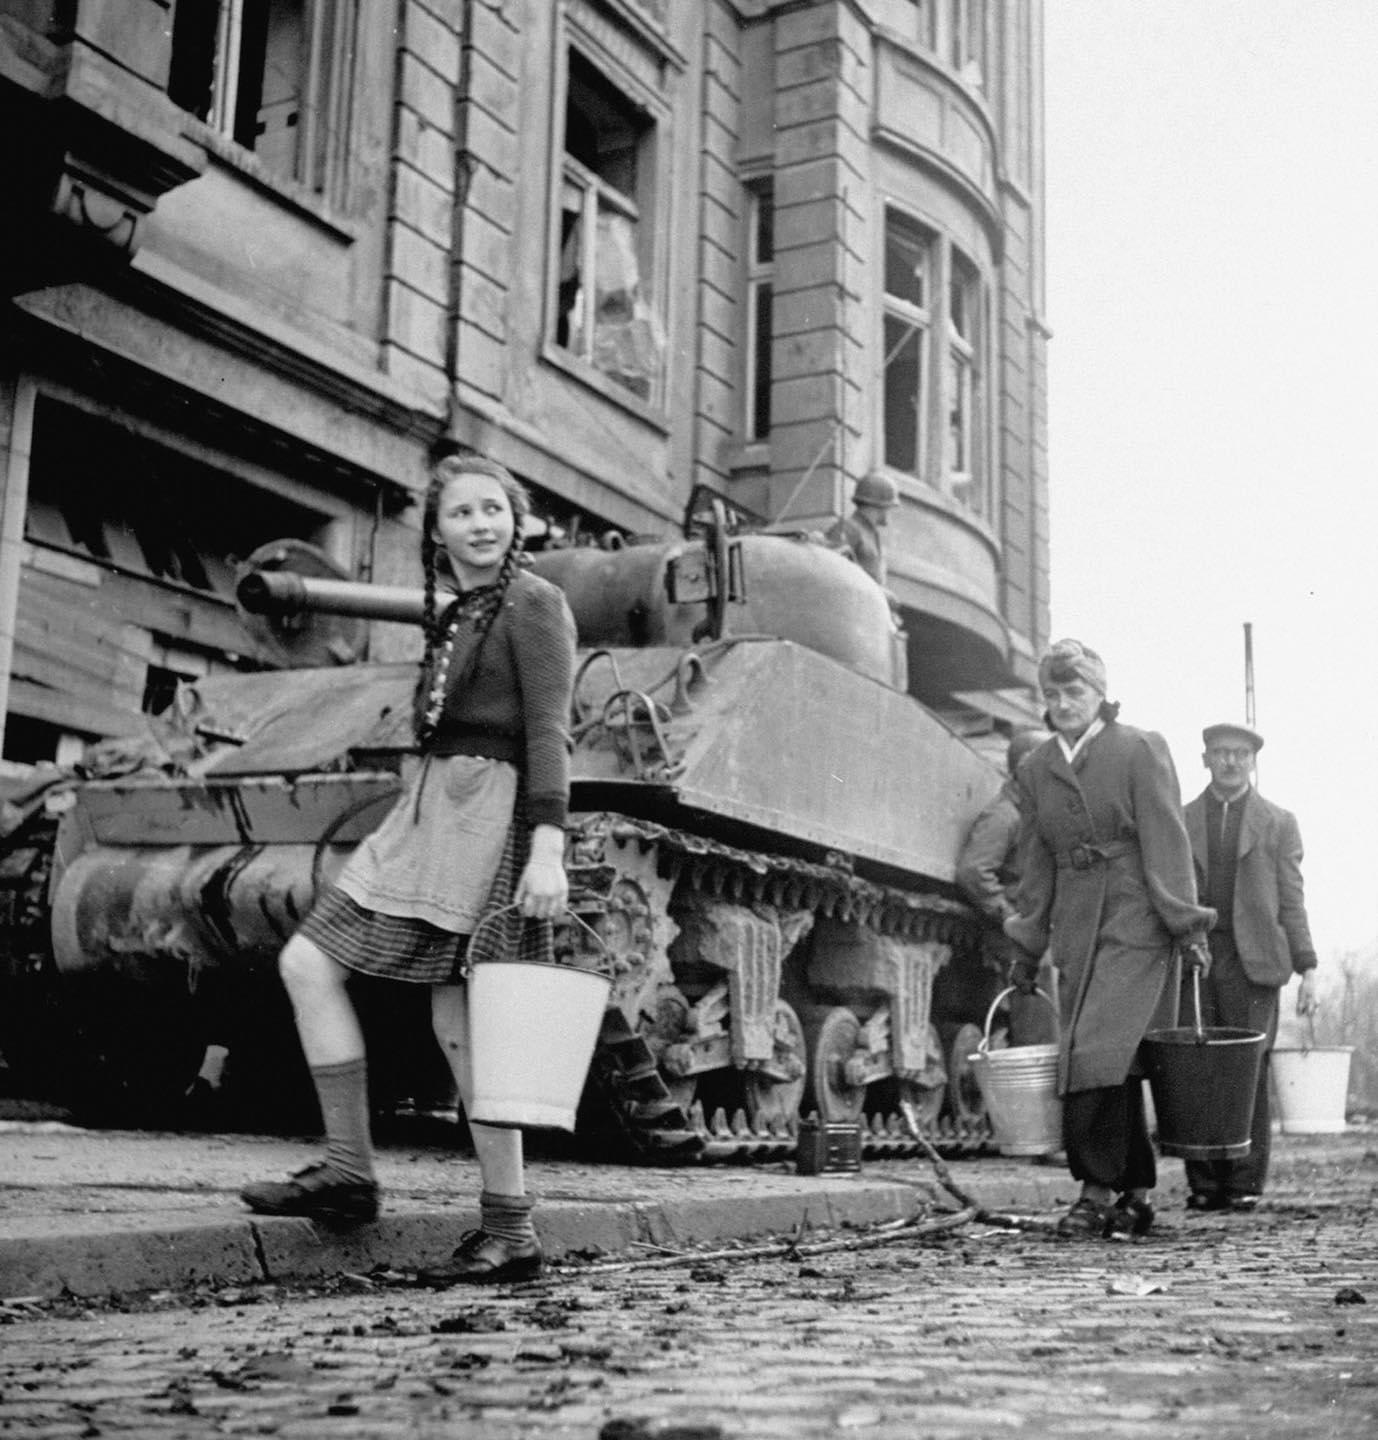 A family passing a Sherman tank while fetching water in Cologne, Germany, 1945.